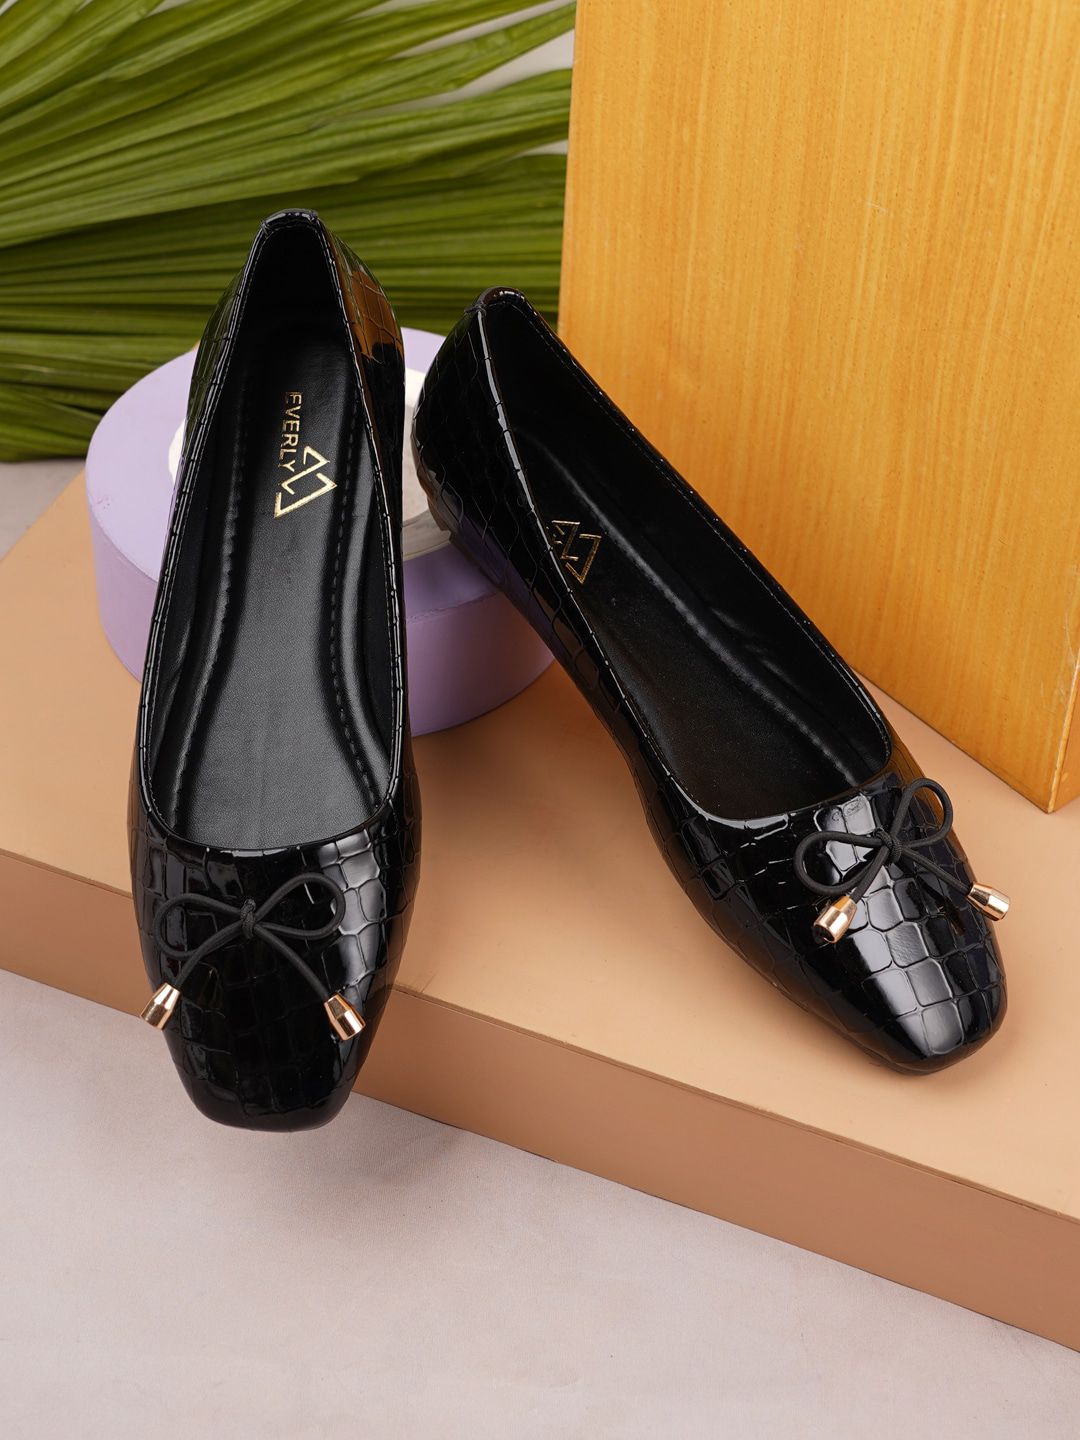 EVERLY Women Black Printed Ethnic Ballerinas with Bows Flats Price in India